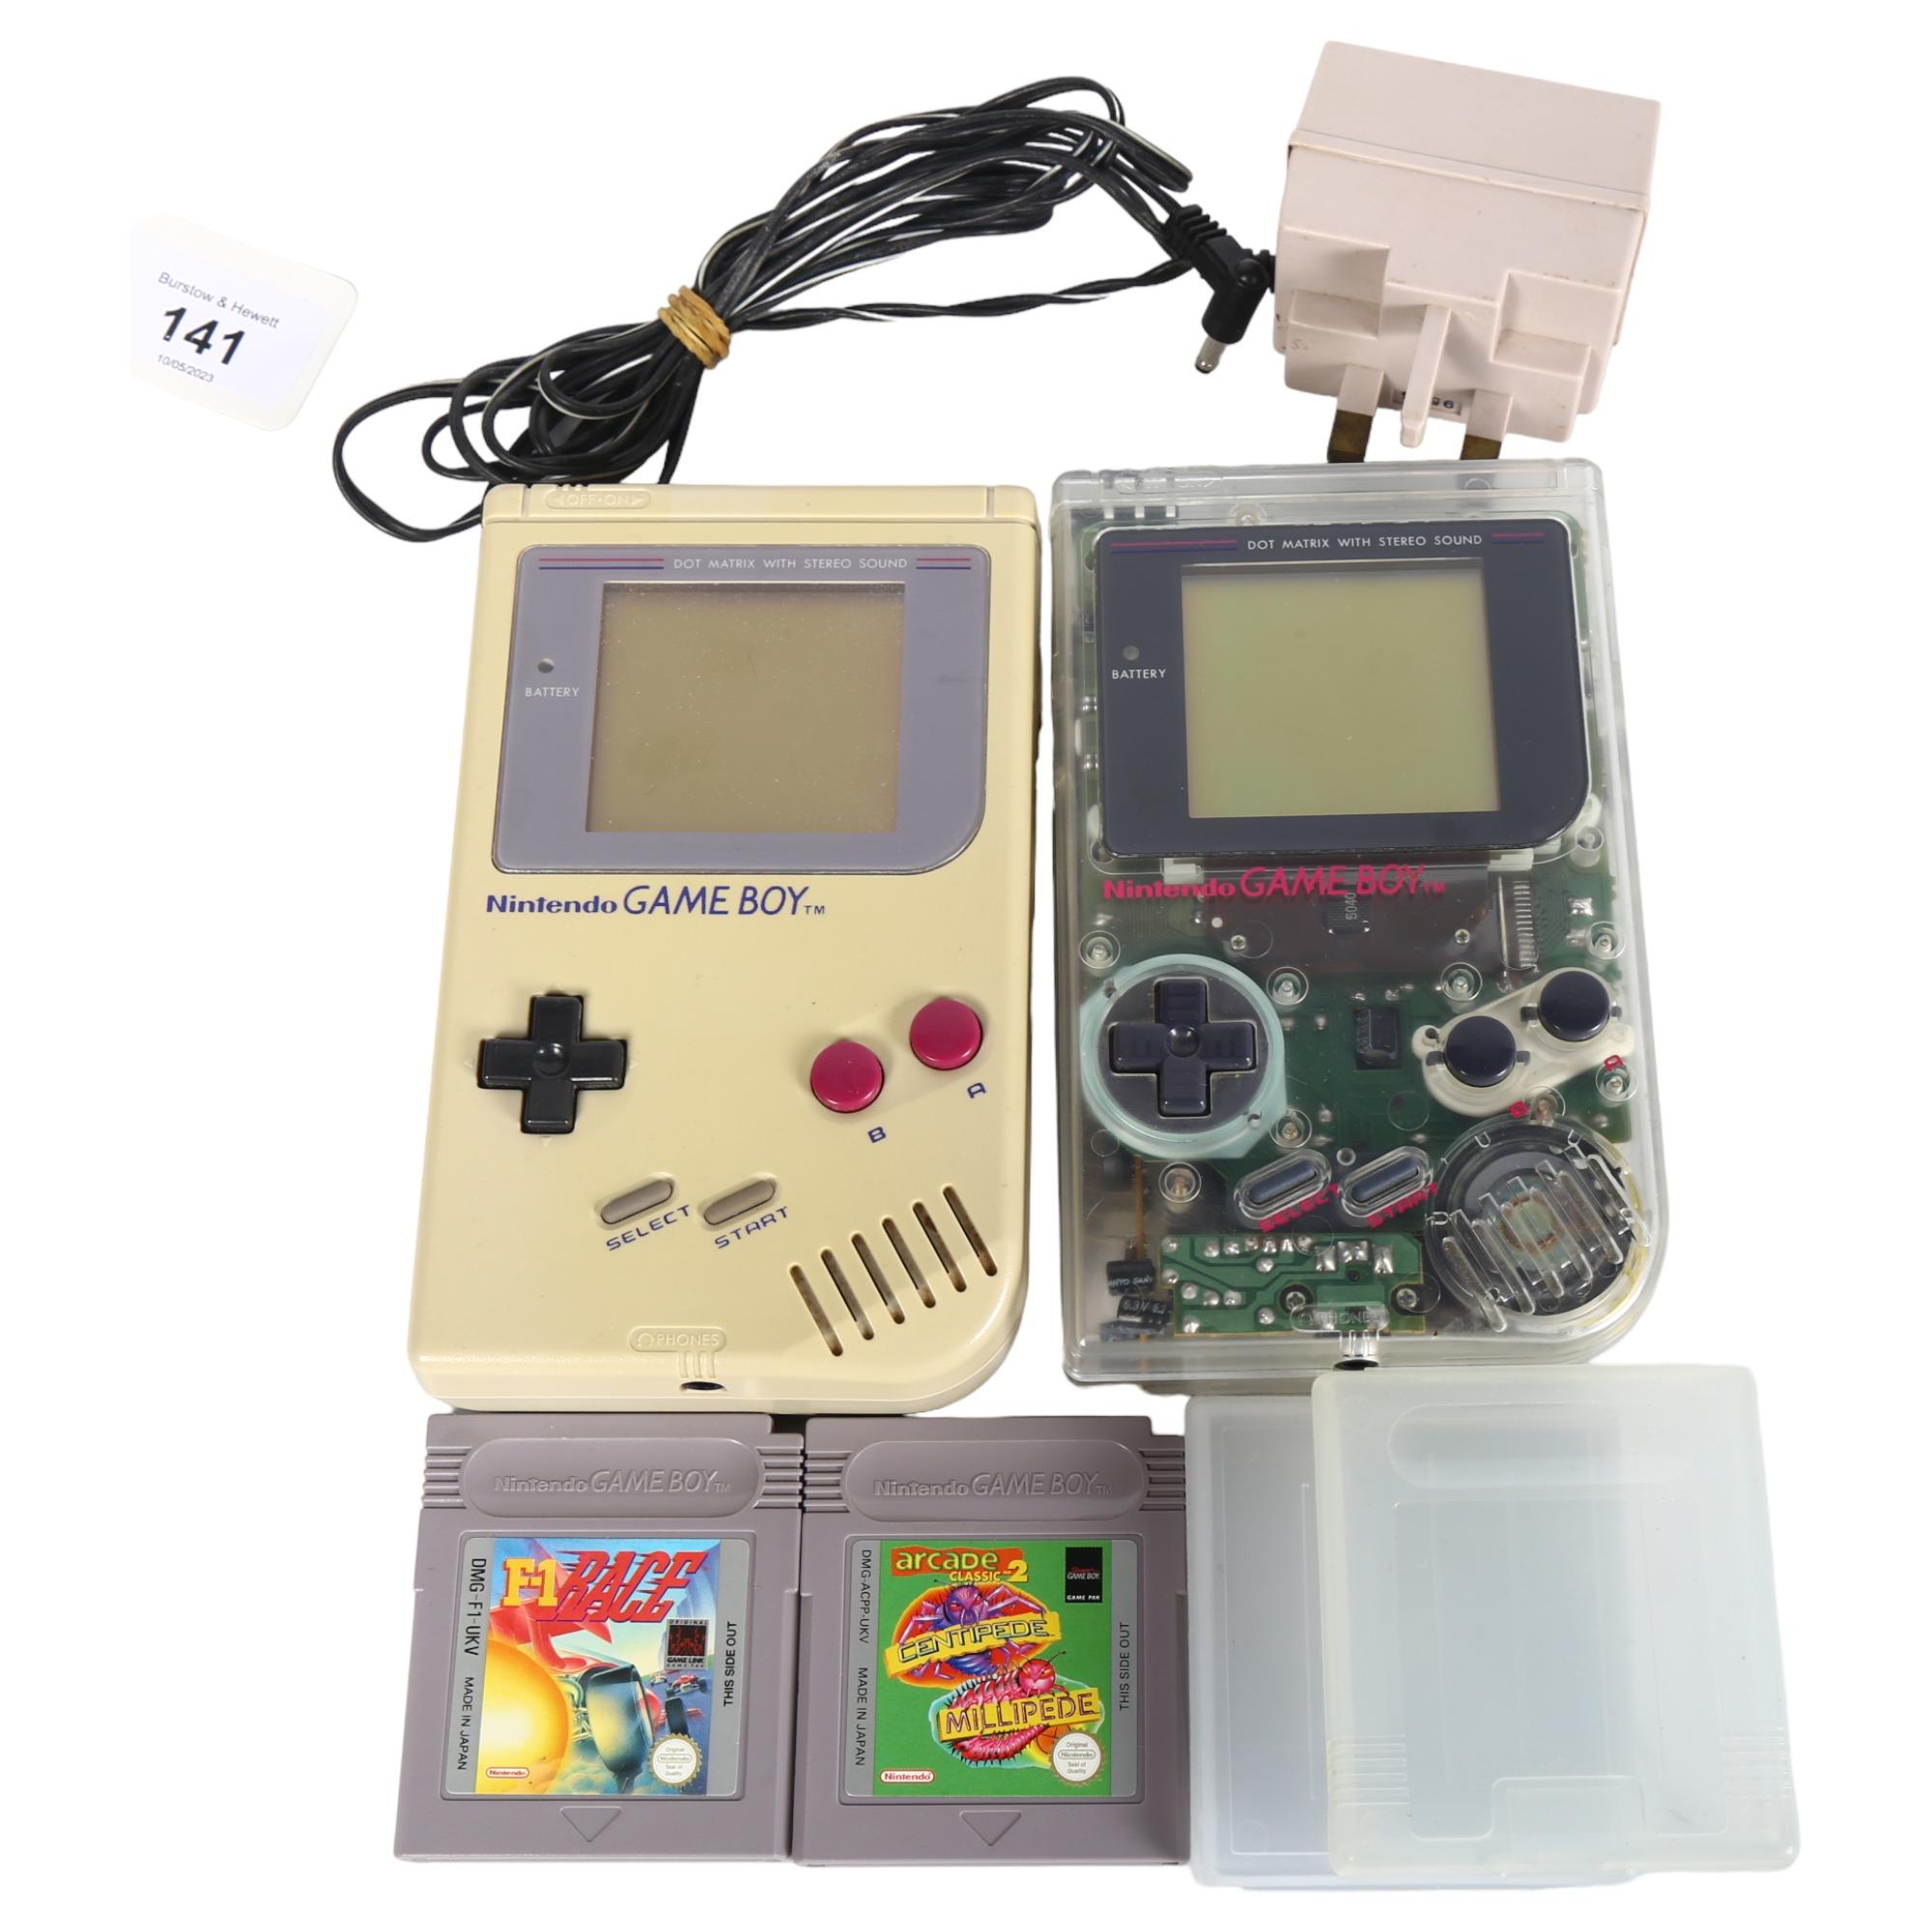 NINTENDO GAMEBOY - a 1989 DMG-01 Gameboy hand-held computer console, not currently working, and a